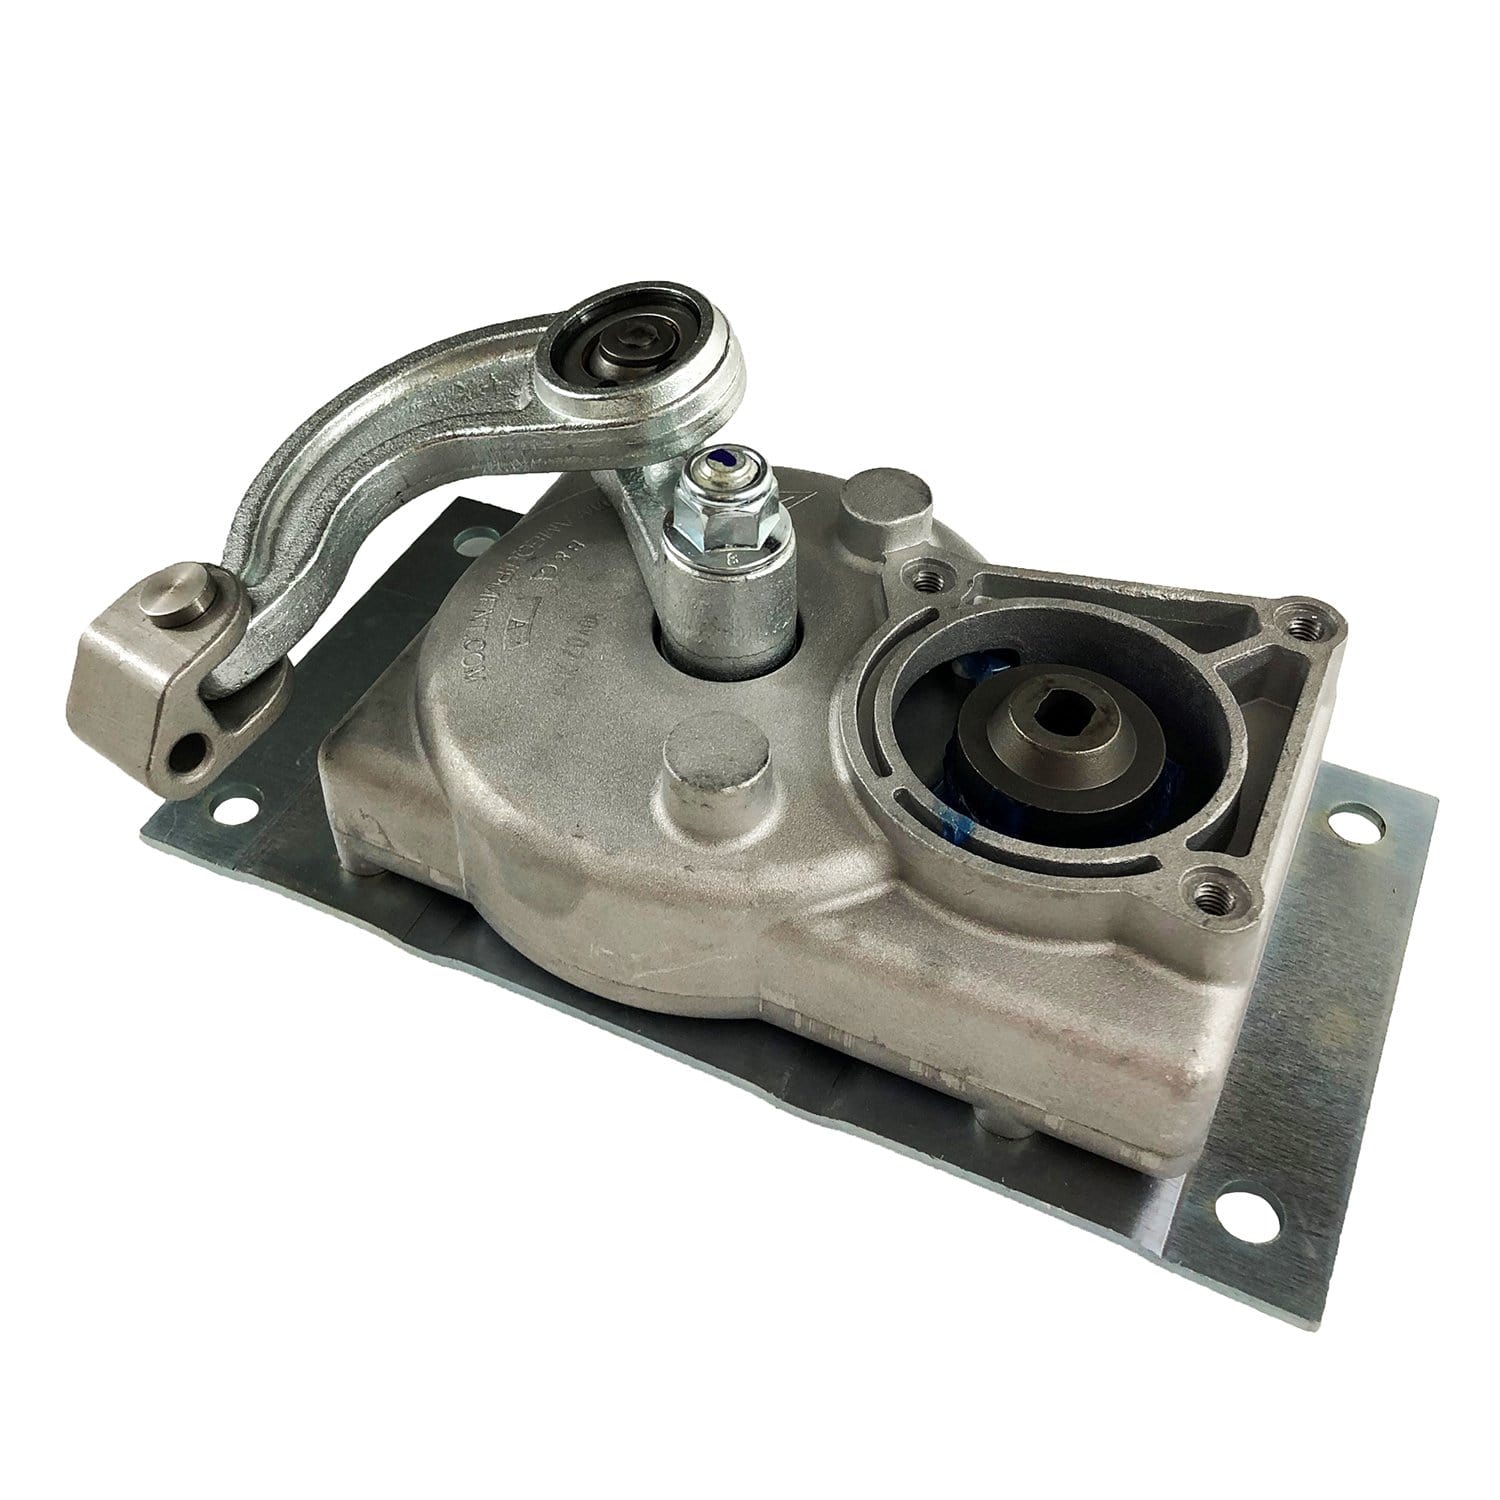 AM Equipment 110-1030 Gear Box with Curved "A" Linkage